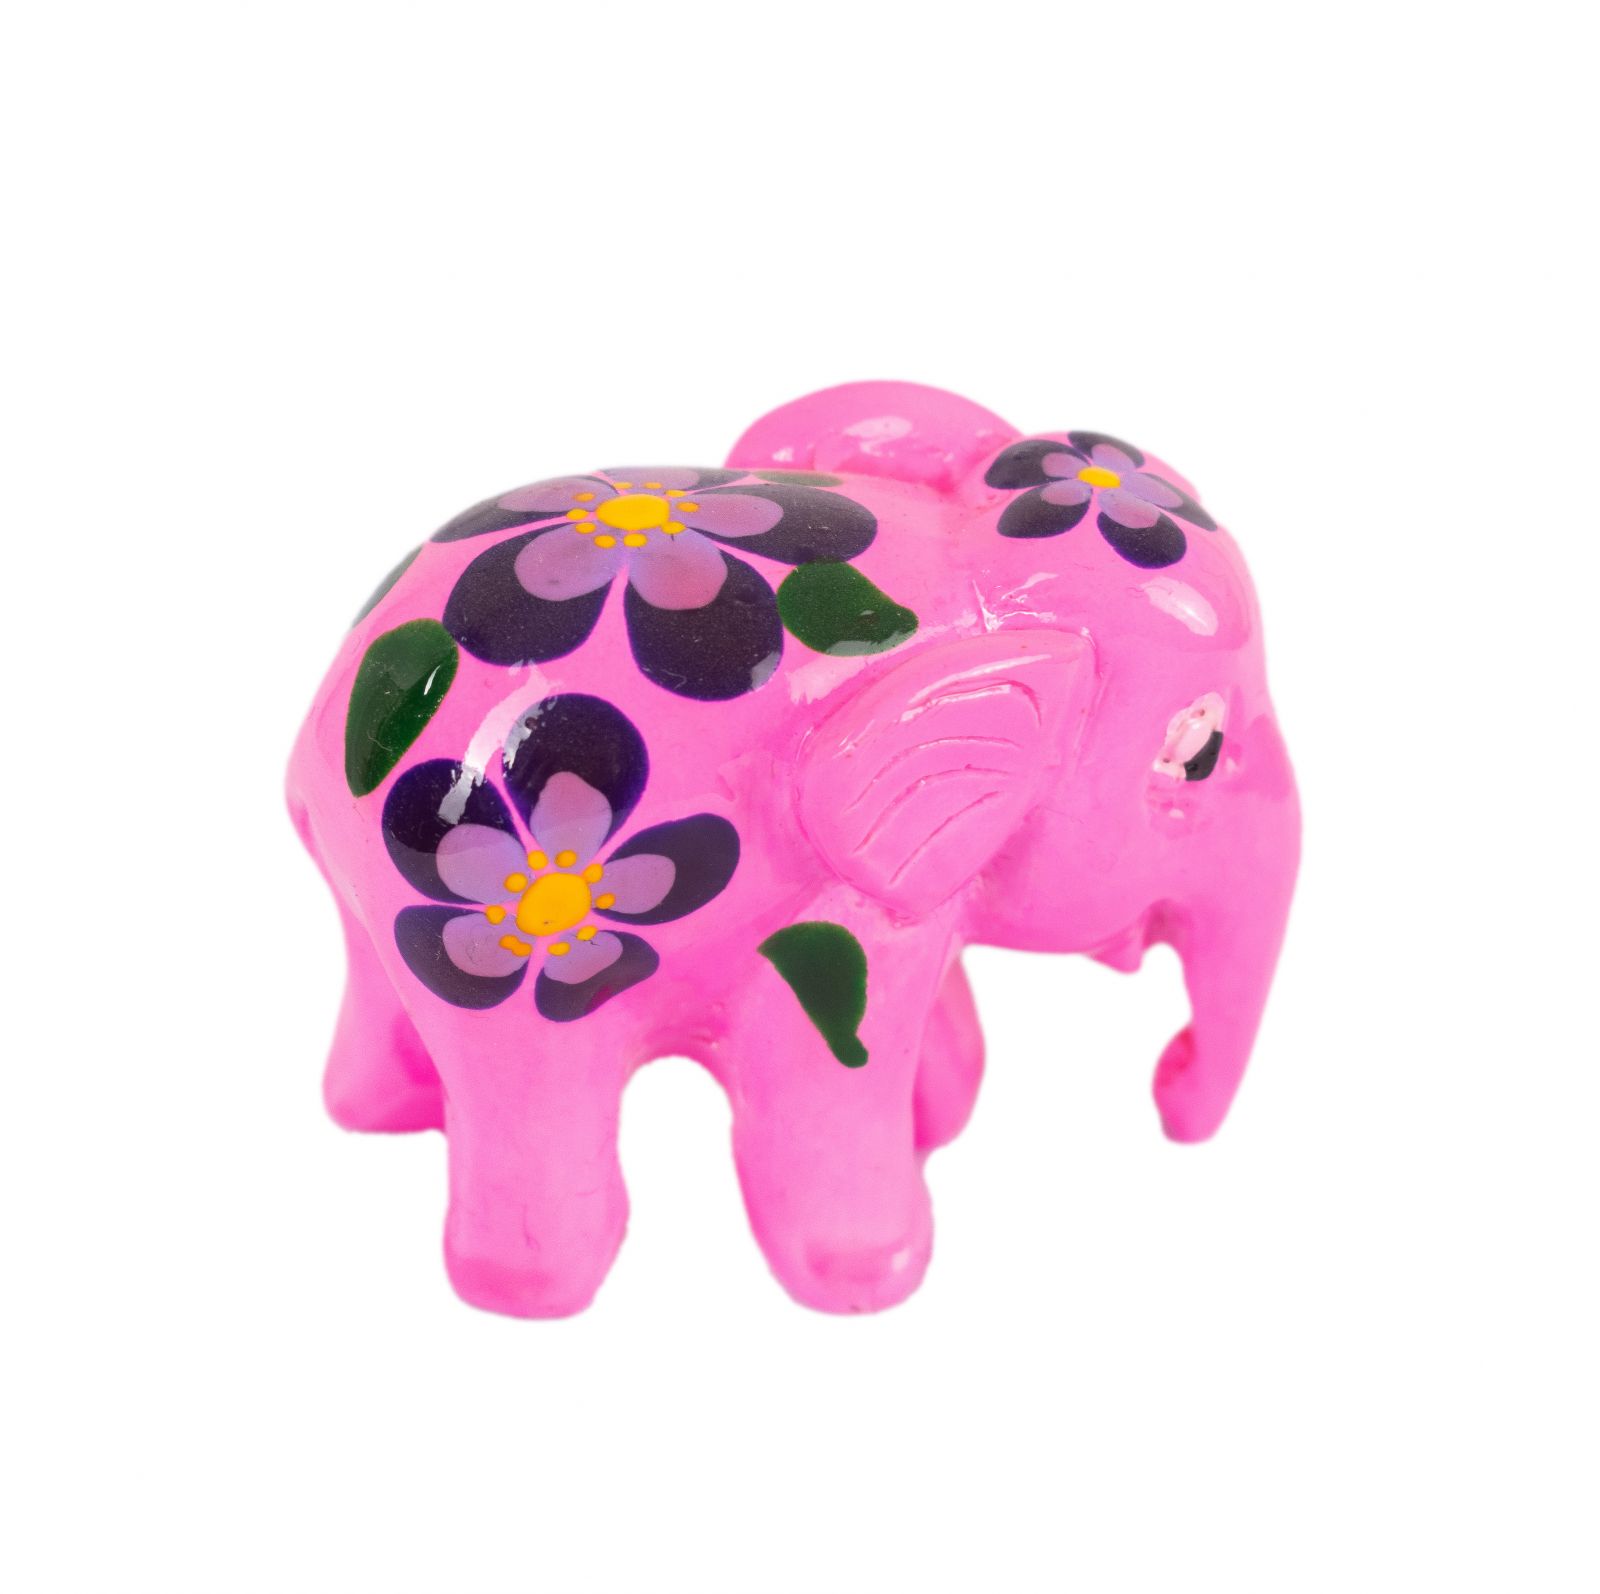 Hand-painted elephant statuette Kuping Puana Thailand